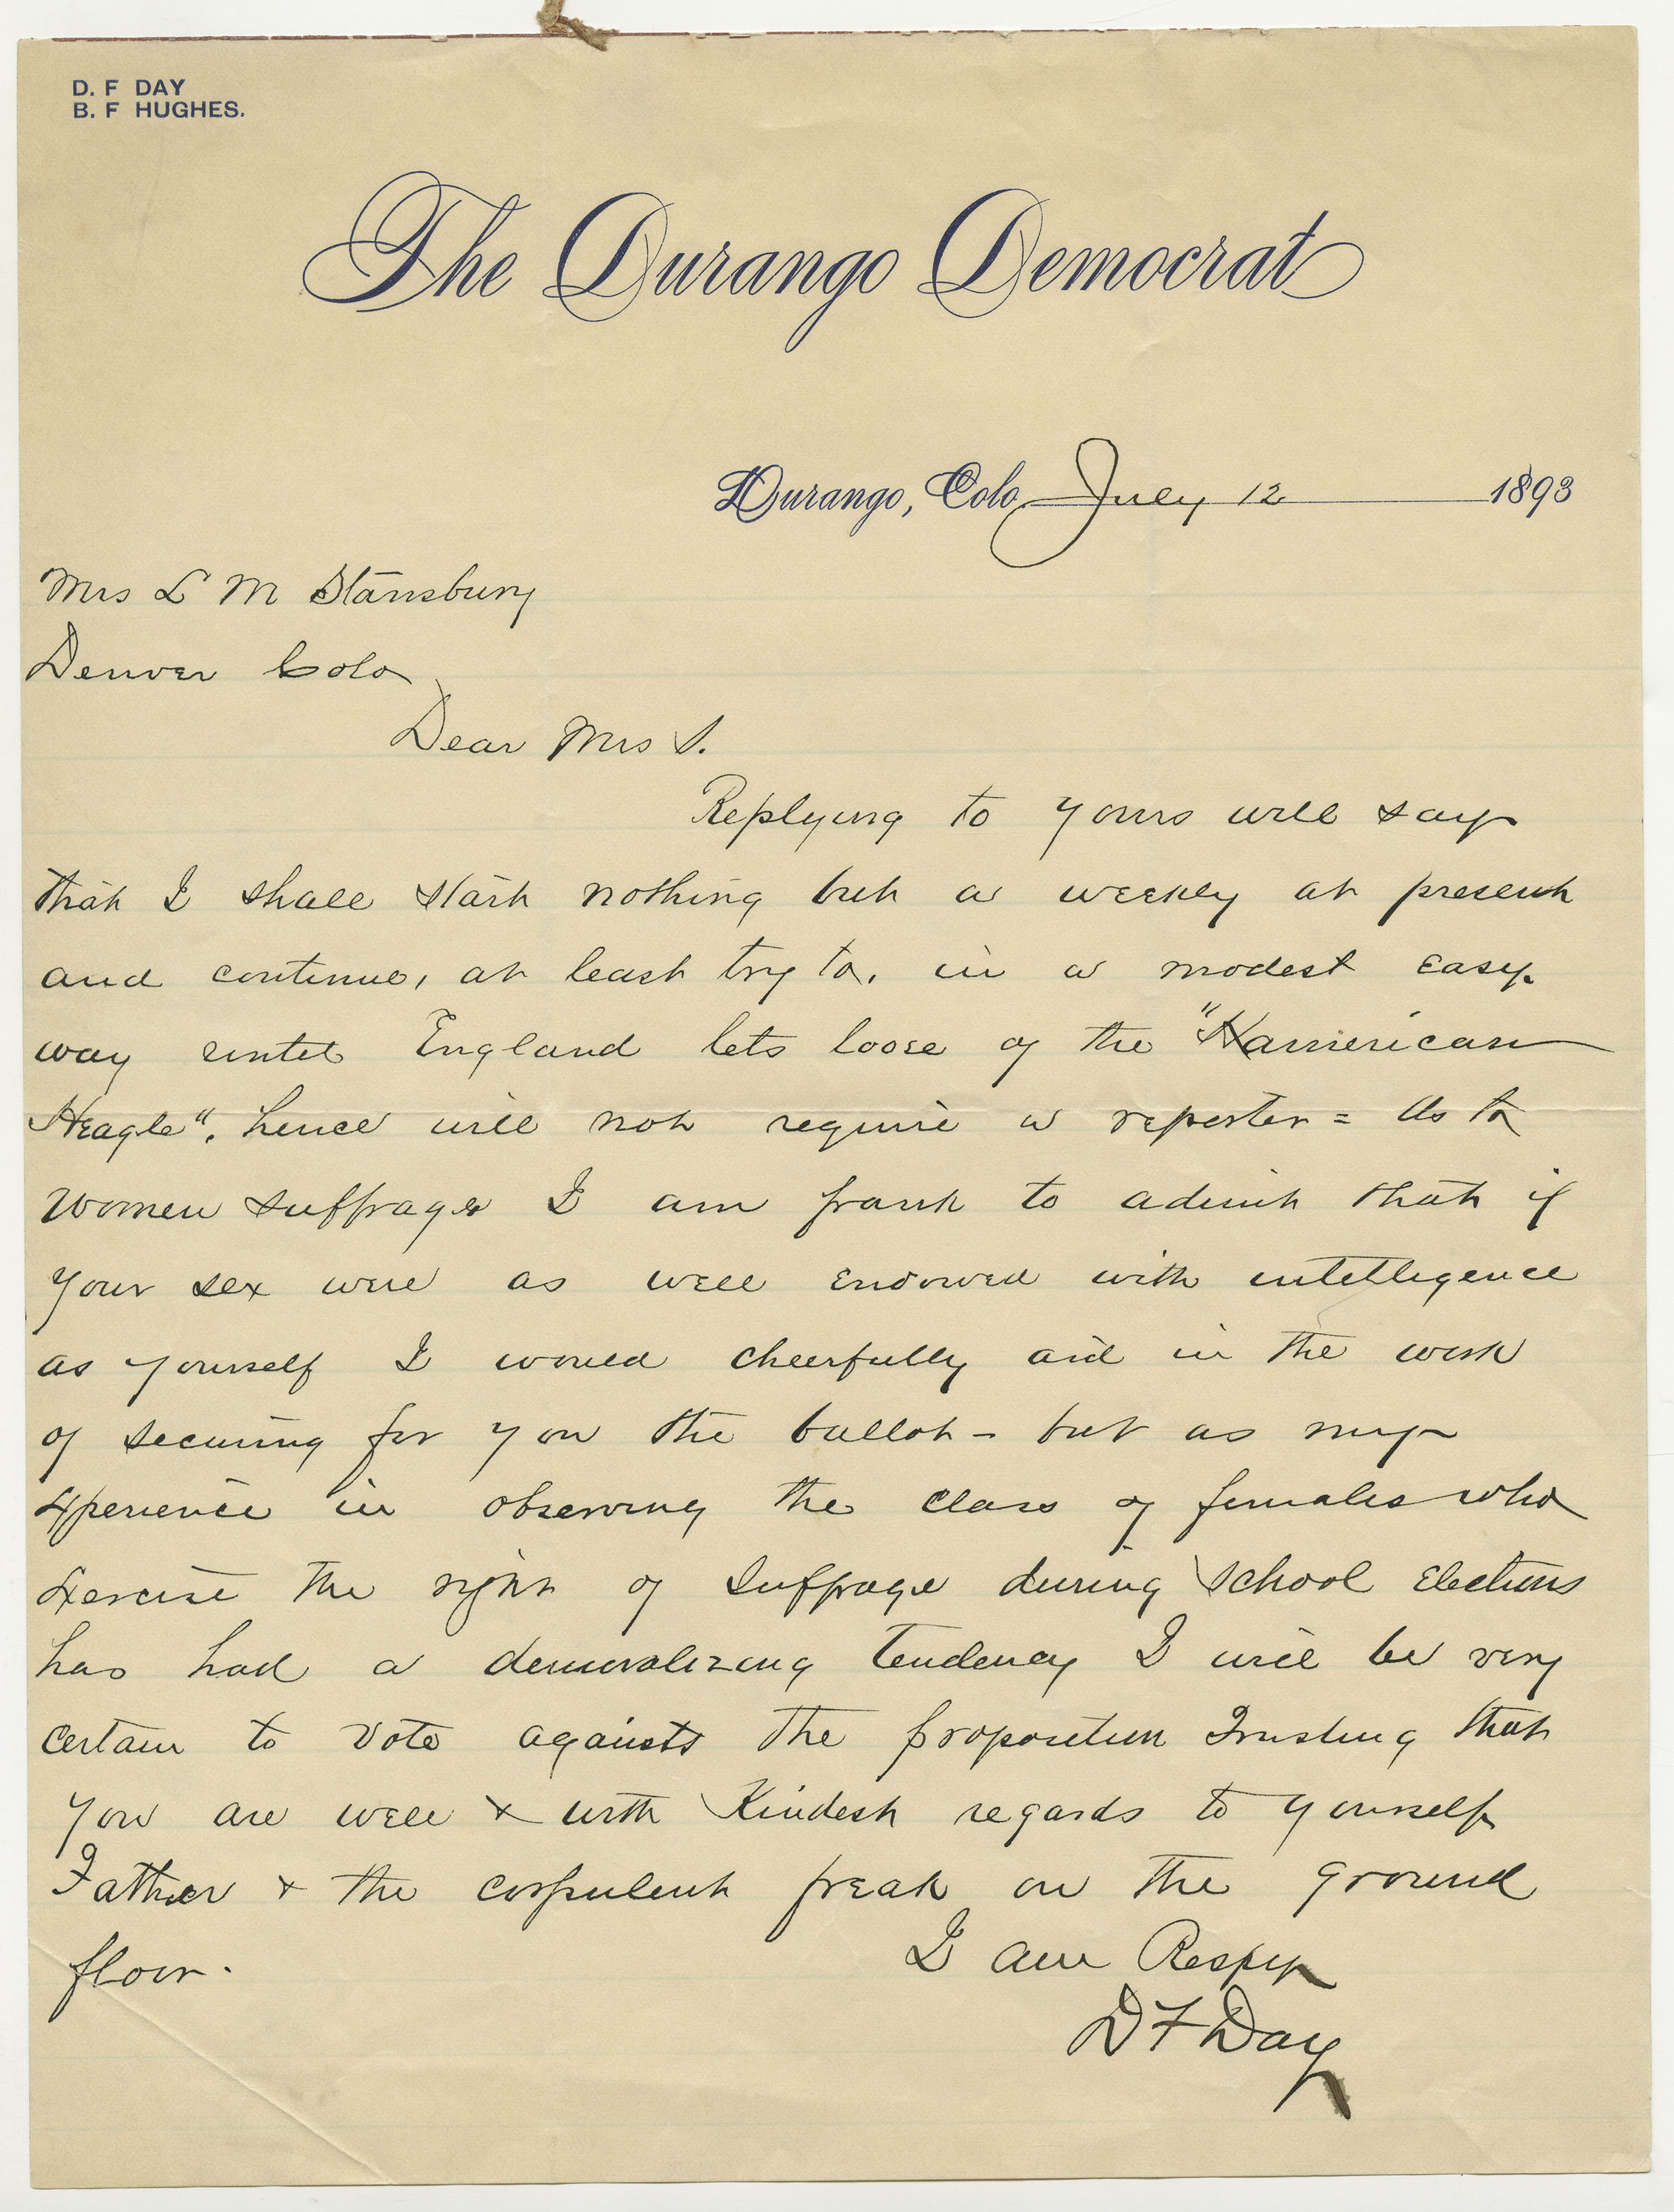 Durango Democrat letterhead, letter from D.F. Day to Ellis Meredith